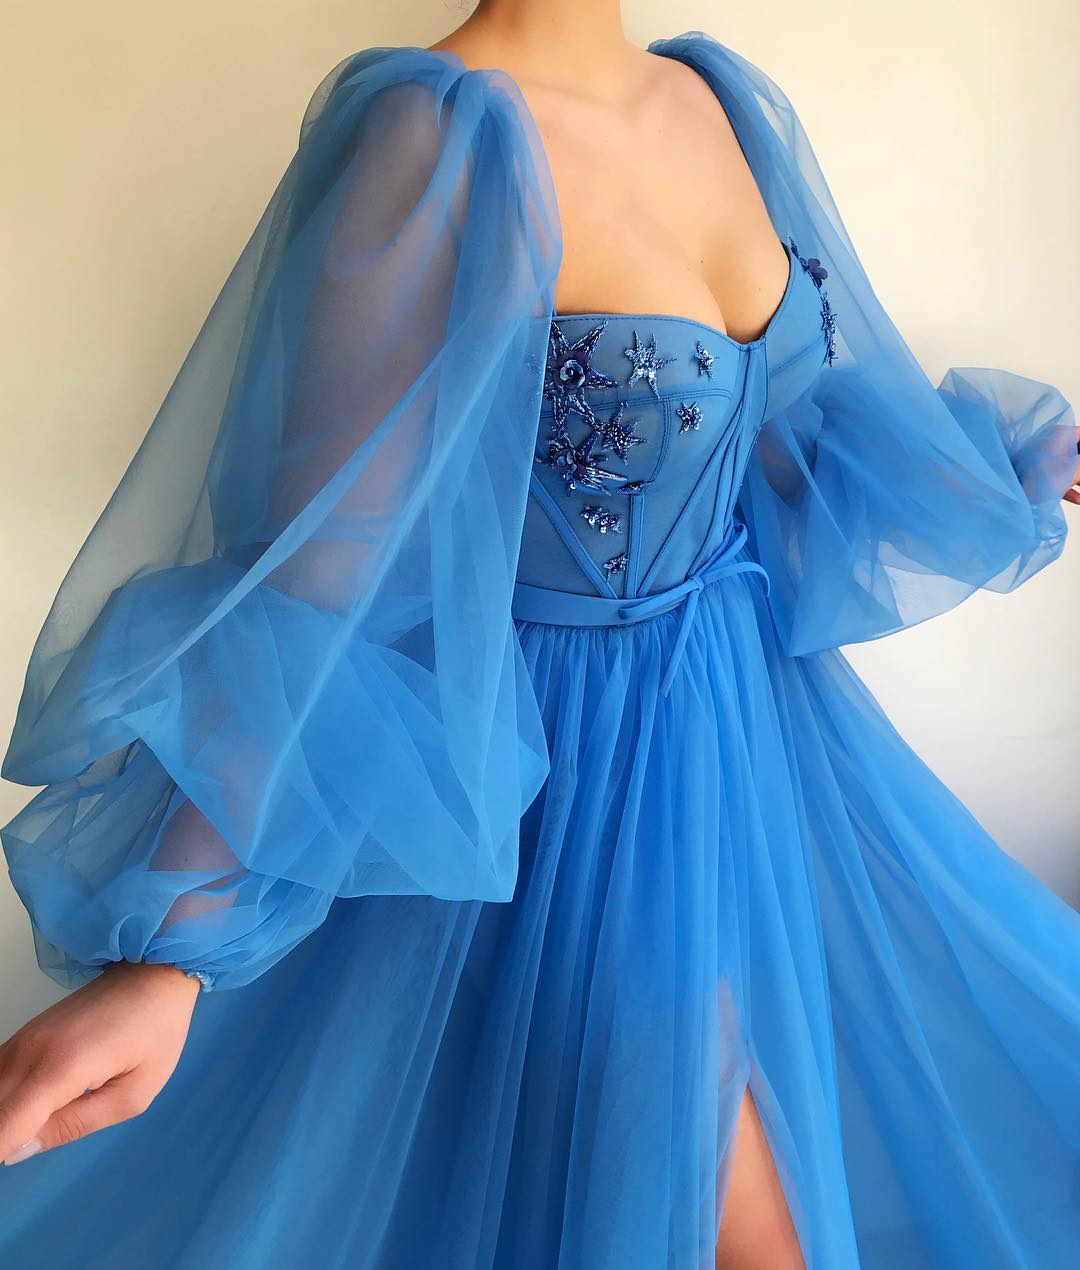 Ocean Blue Long Sleeve Tulle Prom Dress With Slit Sweetheart